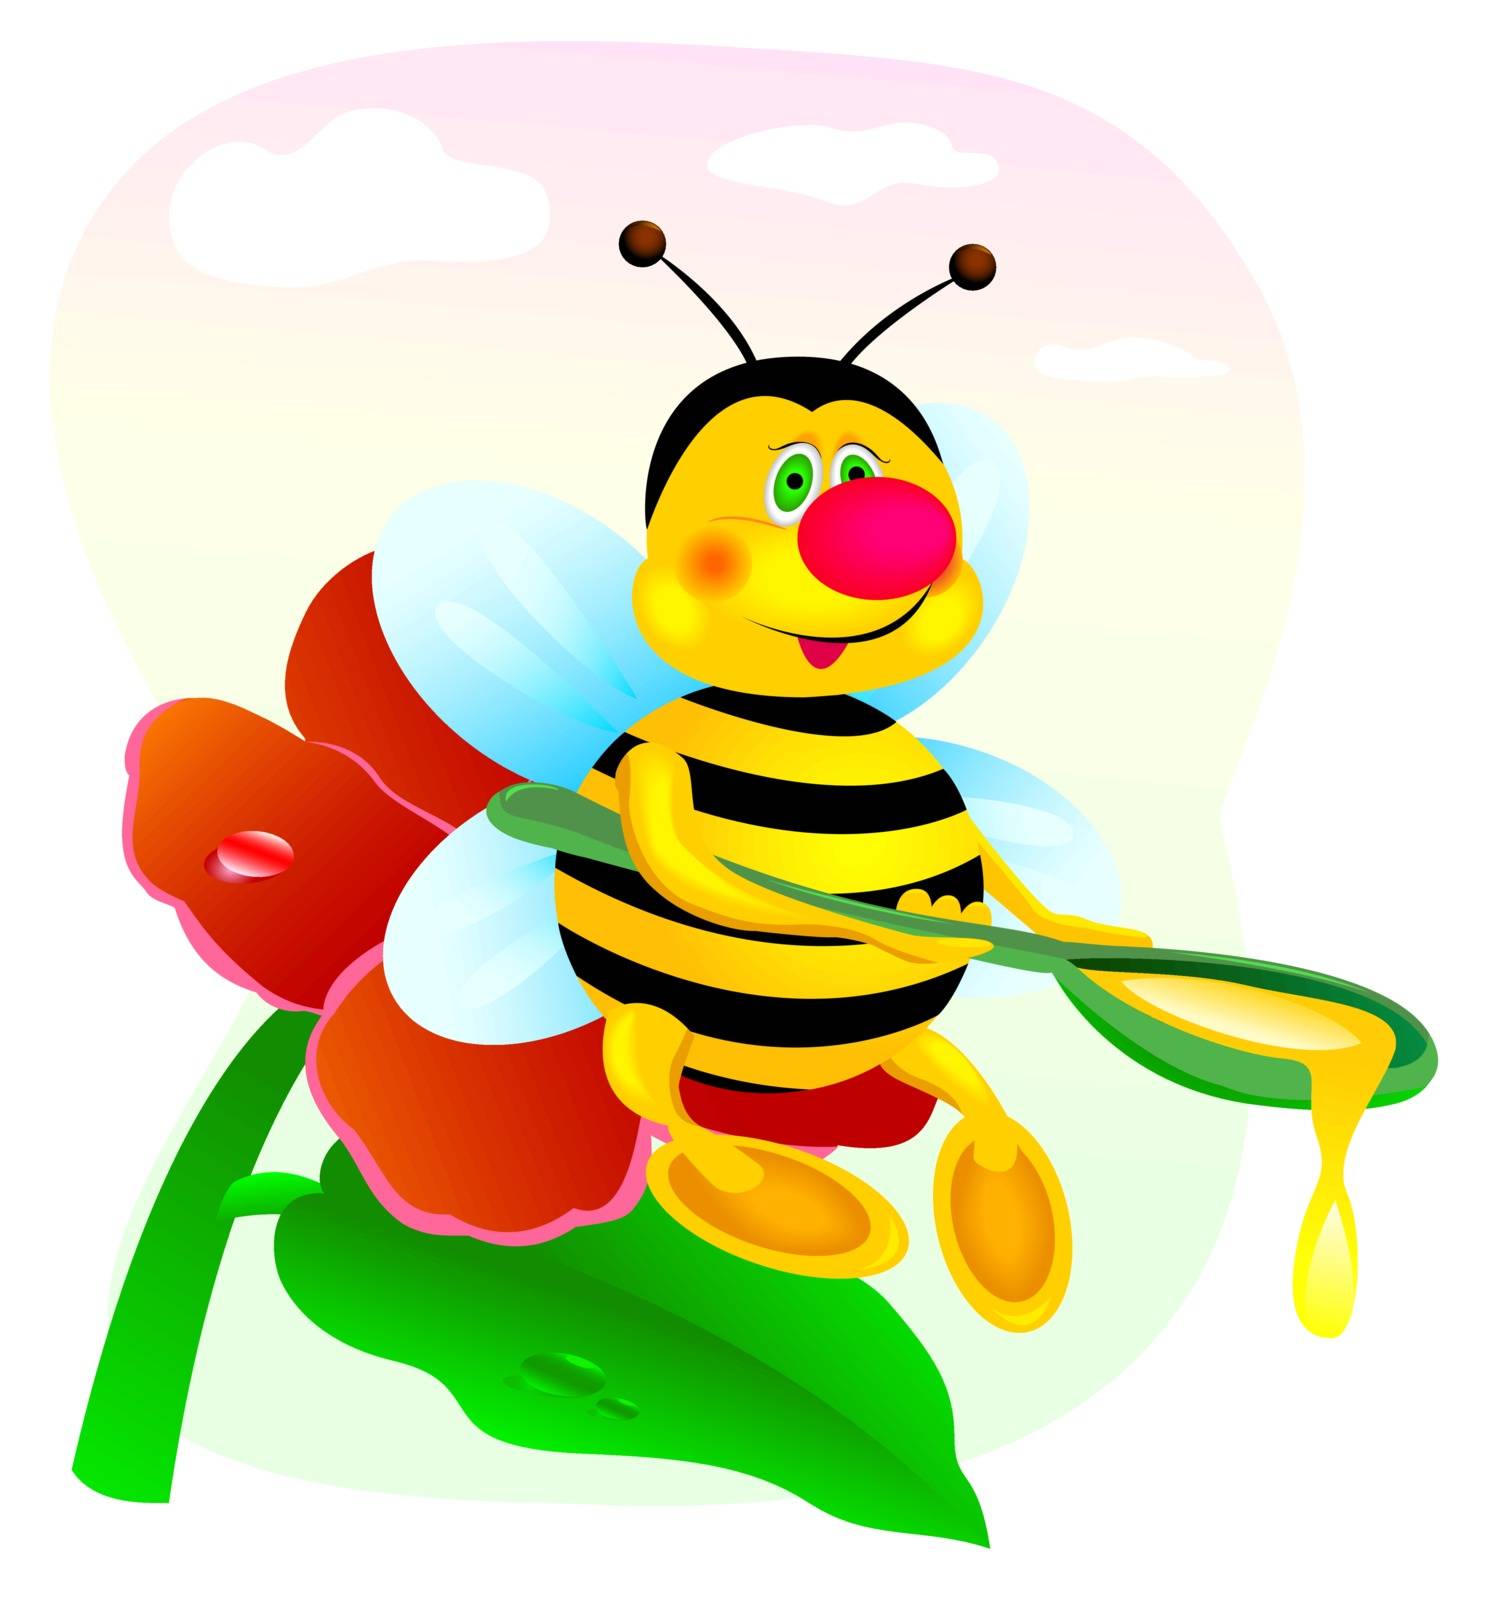 Bee sitting on a red flower with a spoonful of honey in his hands.